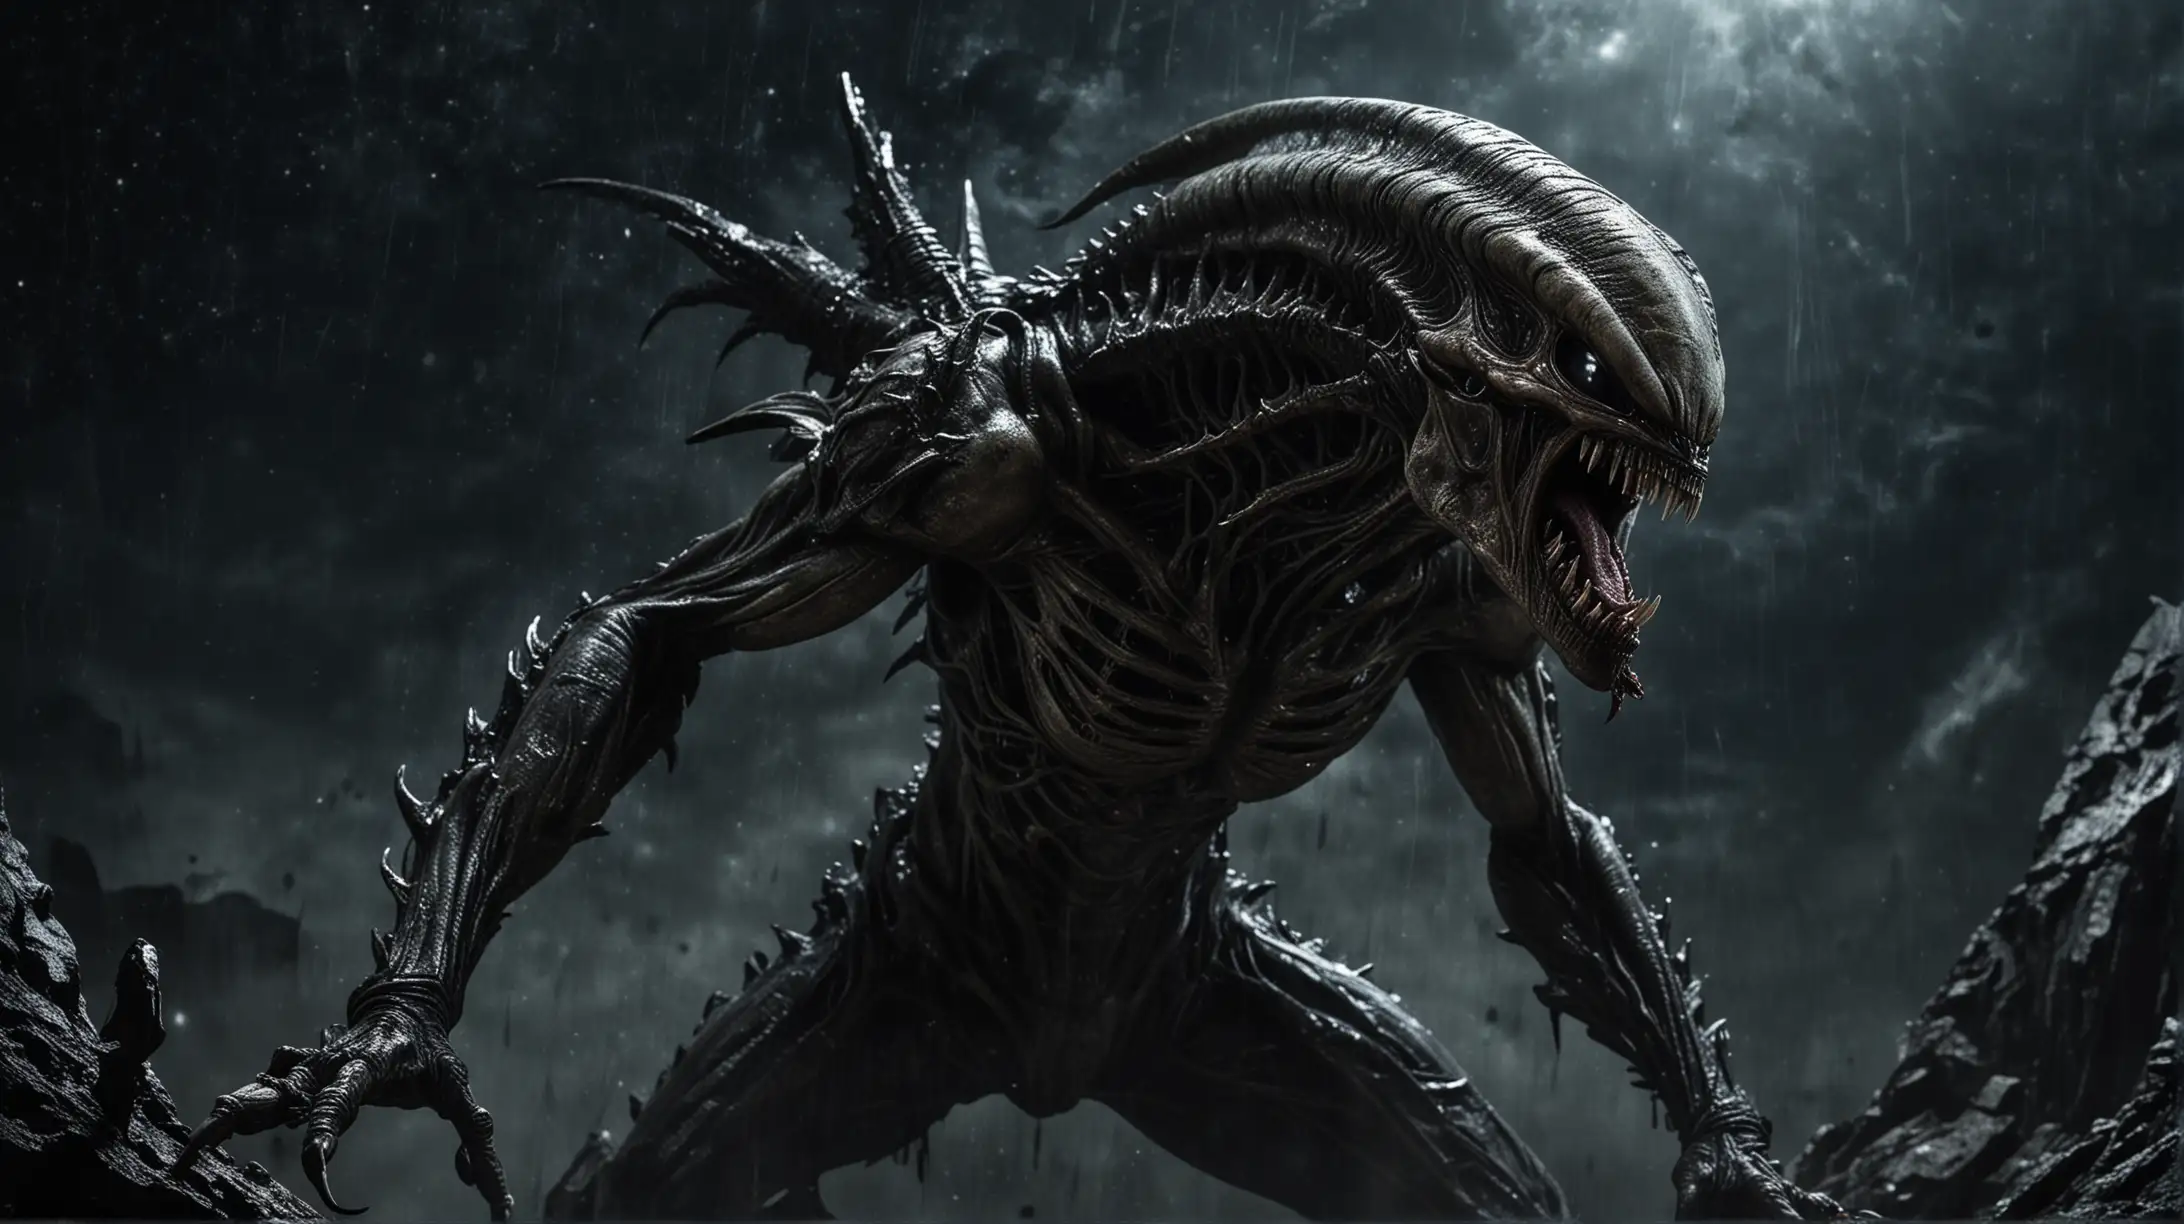 Menacing Alien Creature with Claws and Fangs in Dark Starry Space